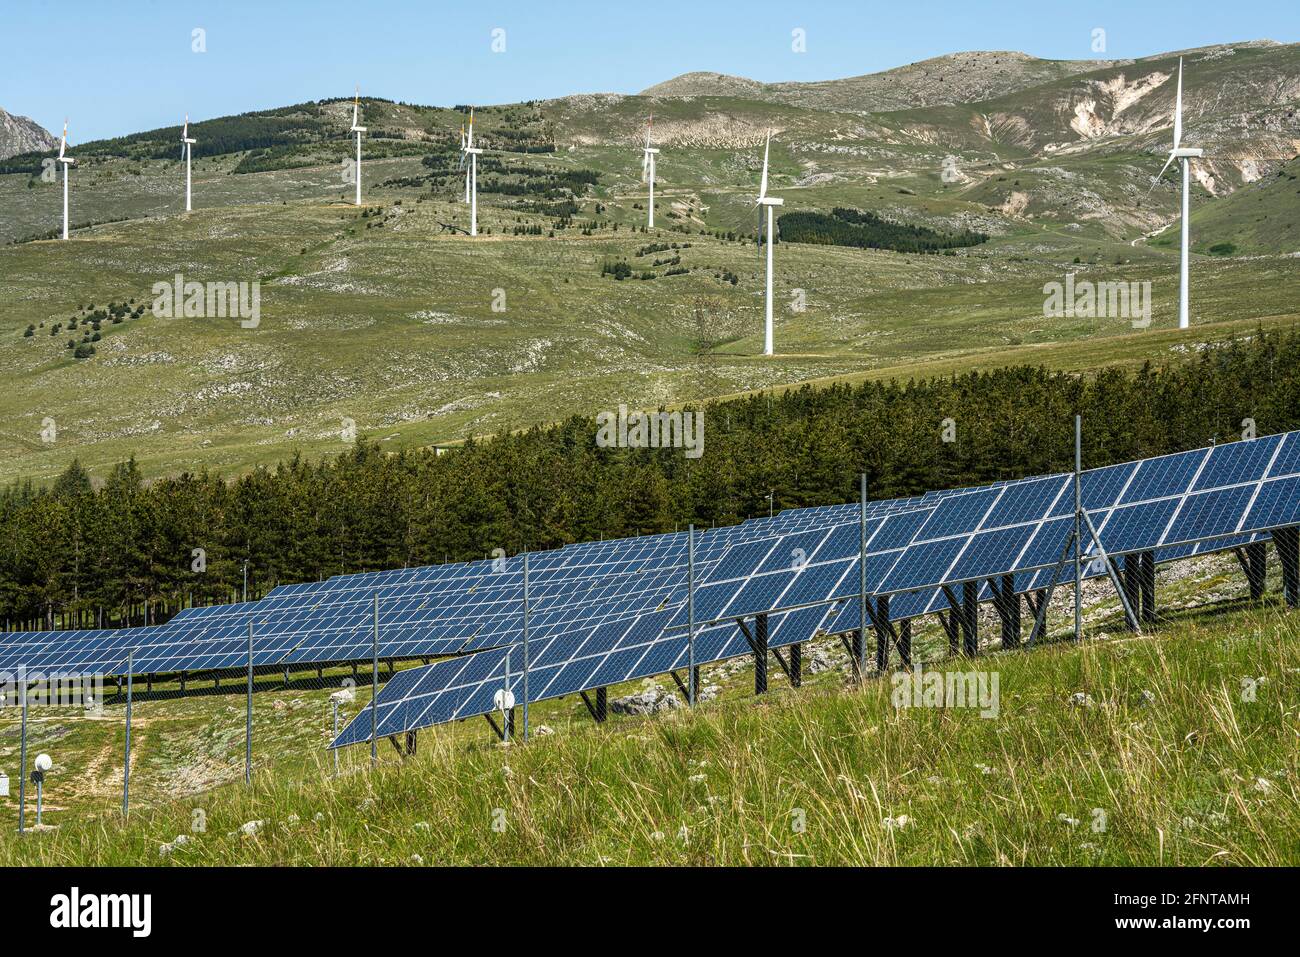 Solar panels and wind turbines for the production of renewable and low-polluting energy. Collarmele, province of L'Aquila, Abruzzo, Italy, Europe Stock Photo